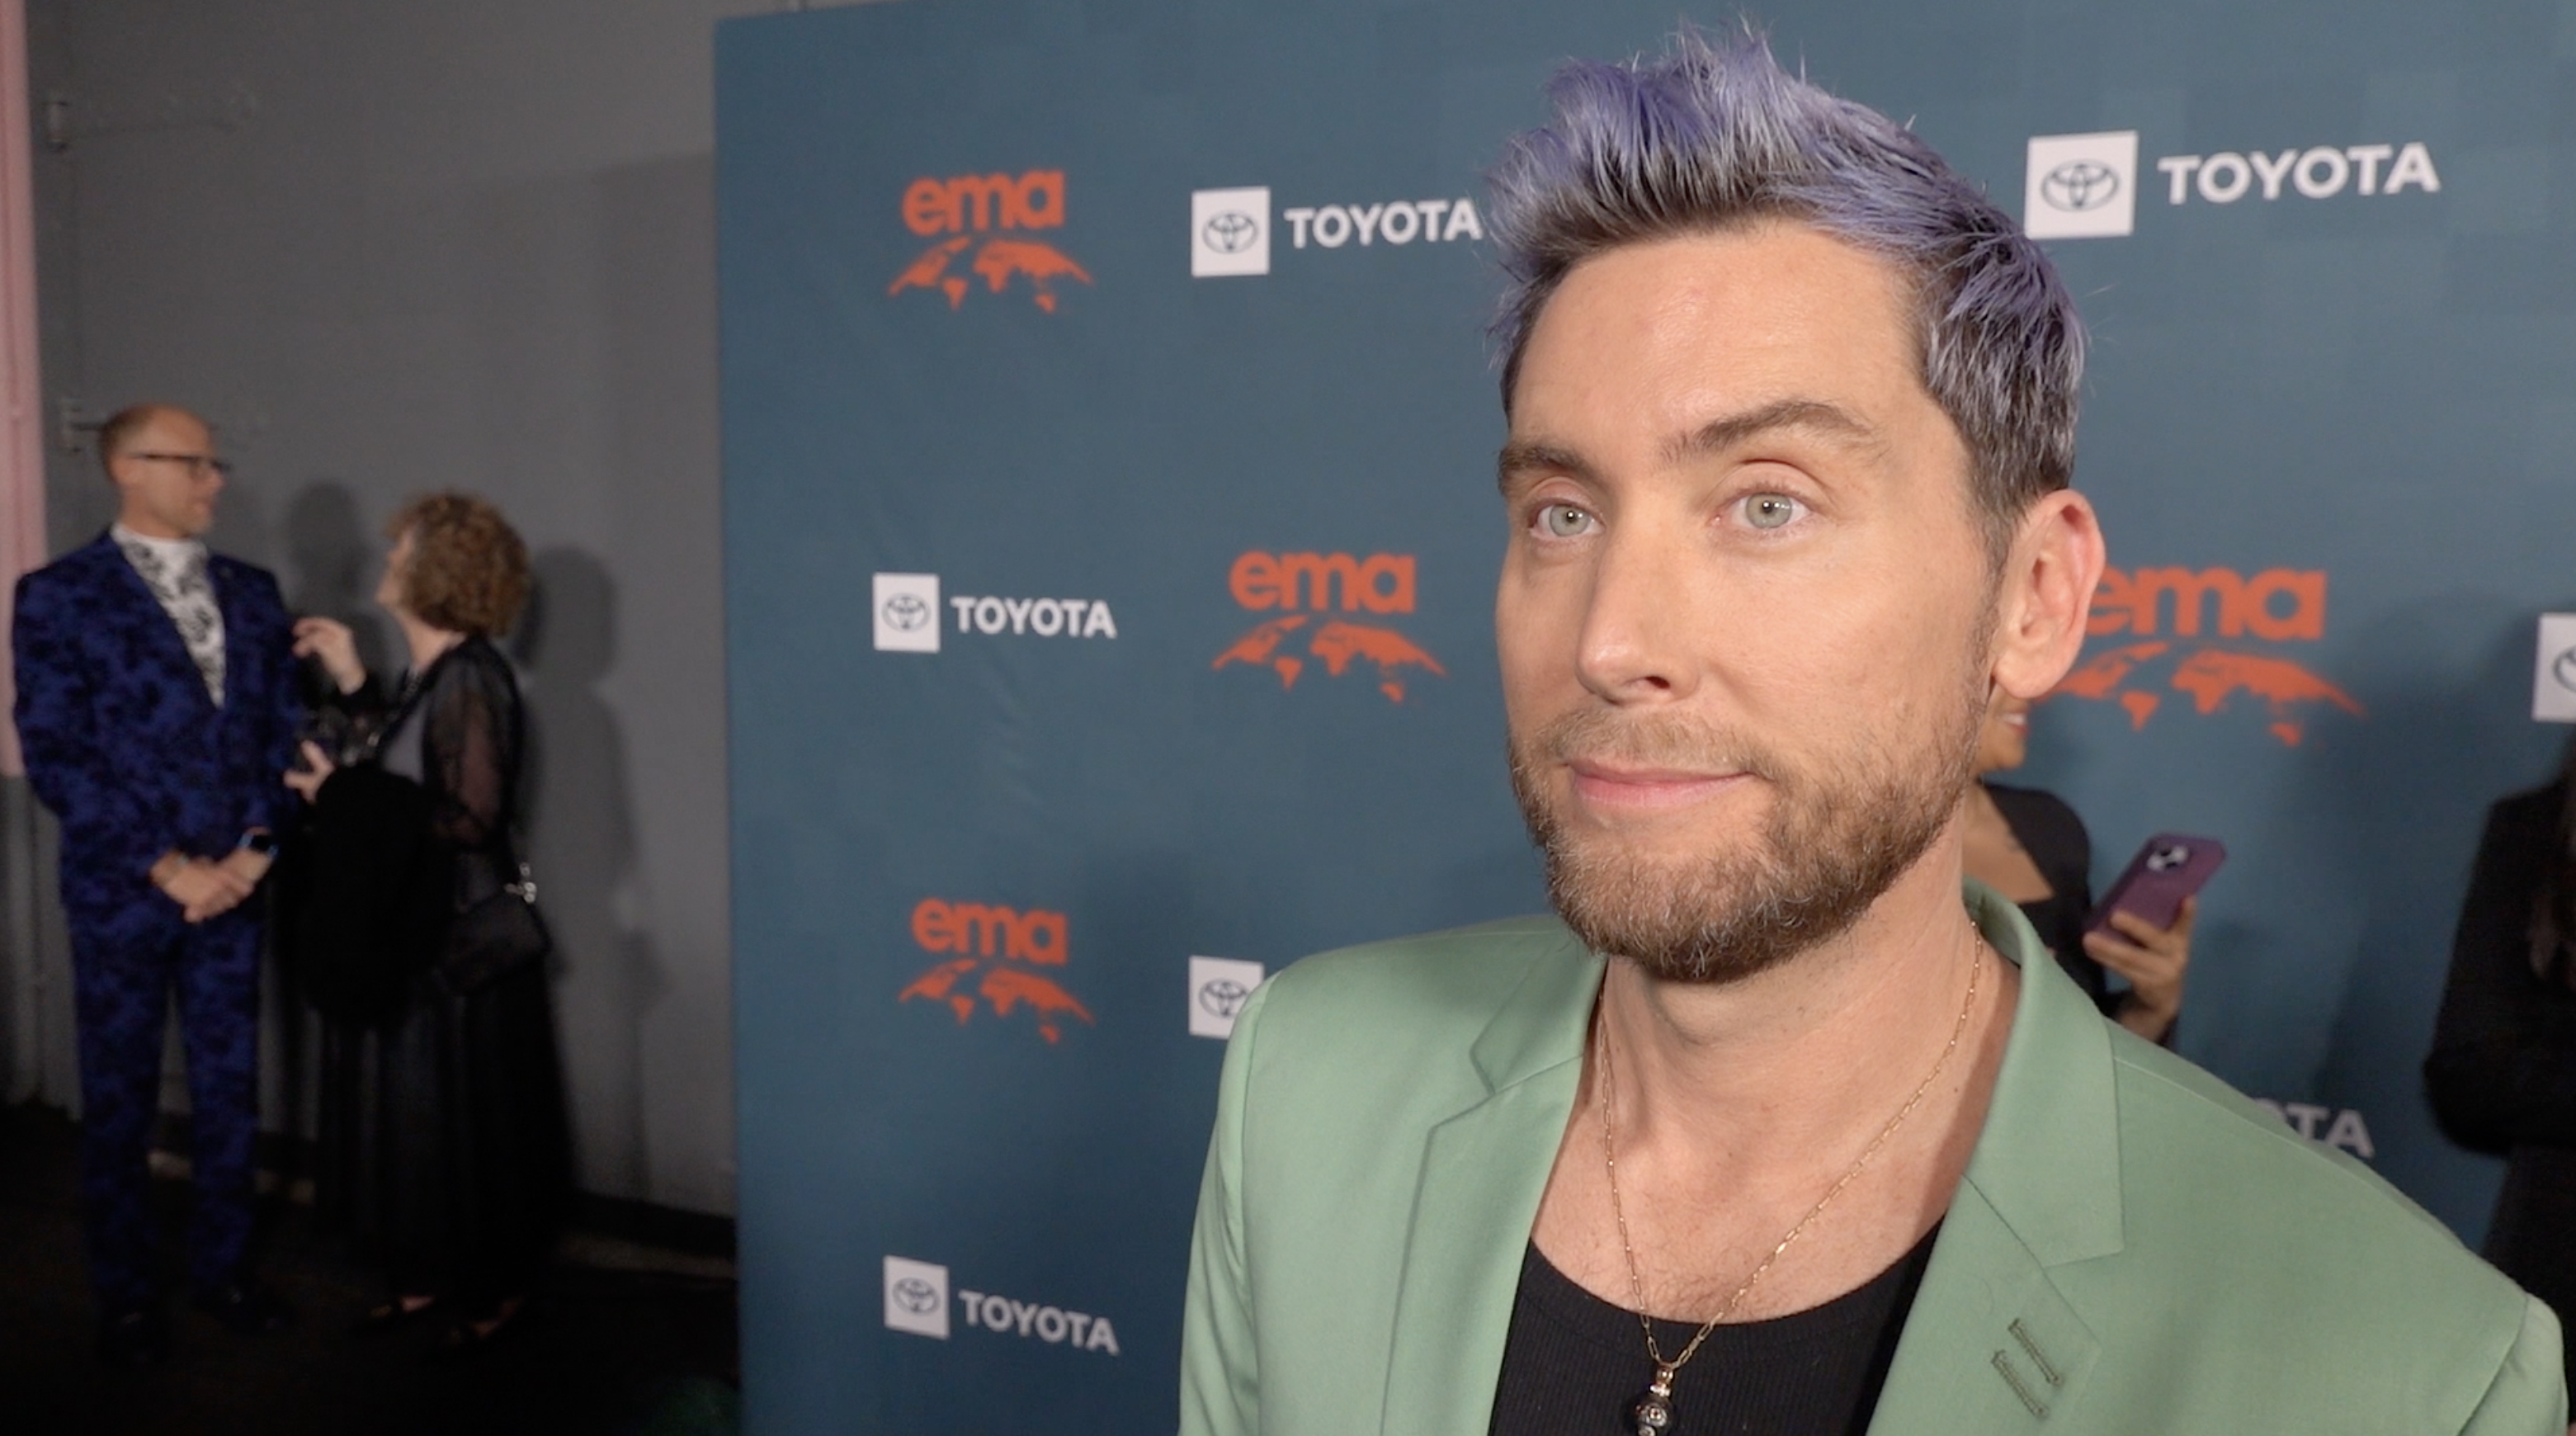 Lance Bass explained that Timberlake apologized to Spears and the two have resolved their differences